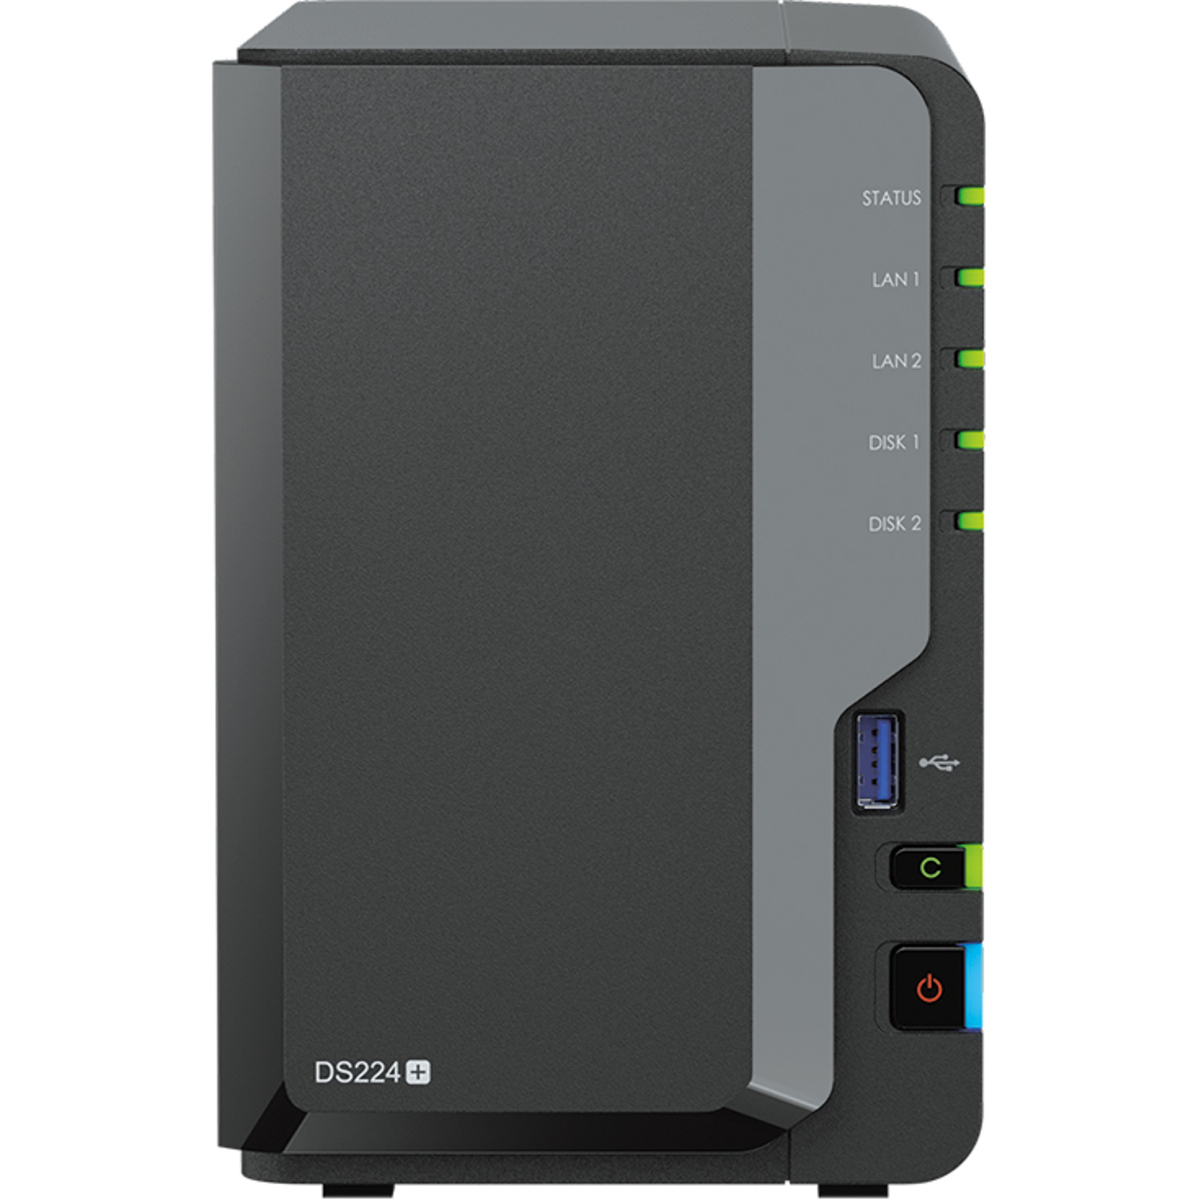 Synology DiskStation DS224+ 8tb 2-Bay Desktop Personal / Basic Home / Small Office NAS - Network Attached Storage Device 2x4tb Western Digital Blue WD40EZRZ 3.5 5400rpm SATA 6Gb/s HDD CONSUMER Class Drives Installed - Burn-In Tested - ON SALE - FREE RAM UPGRADE DiskStation DS224+